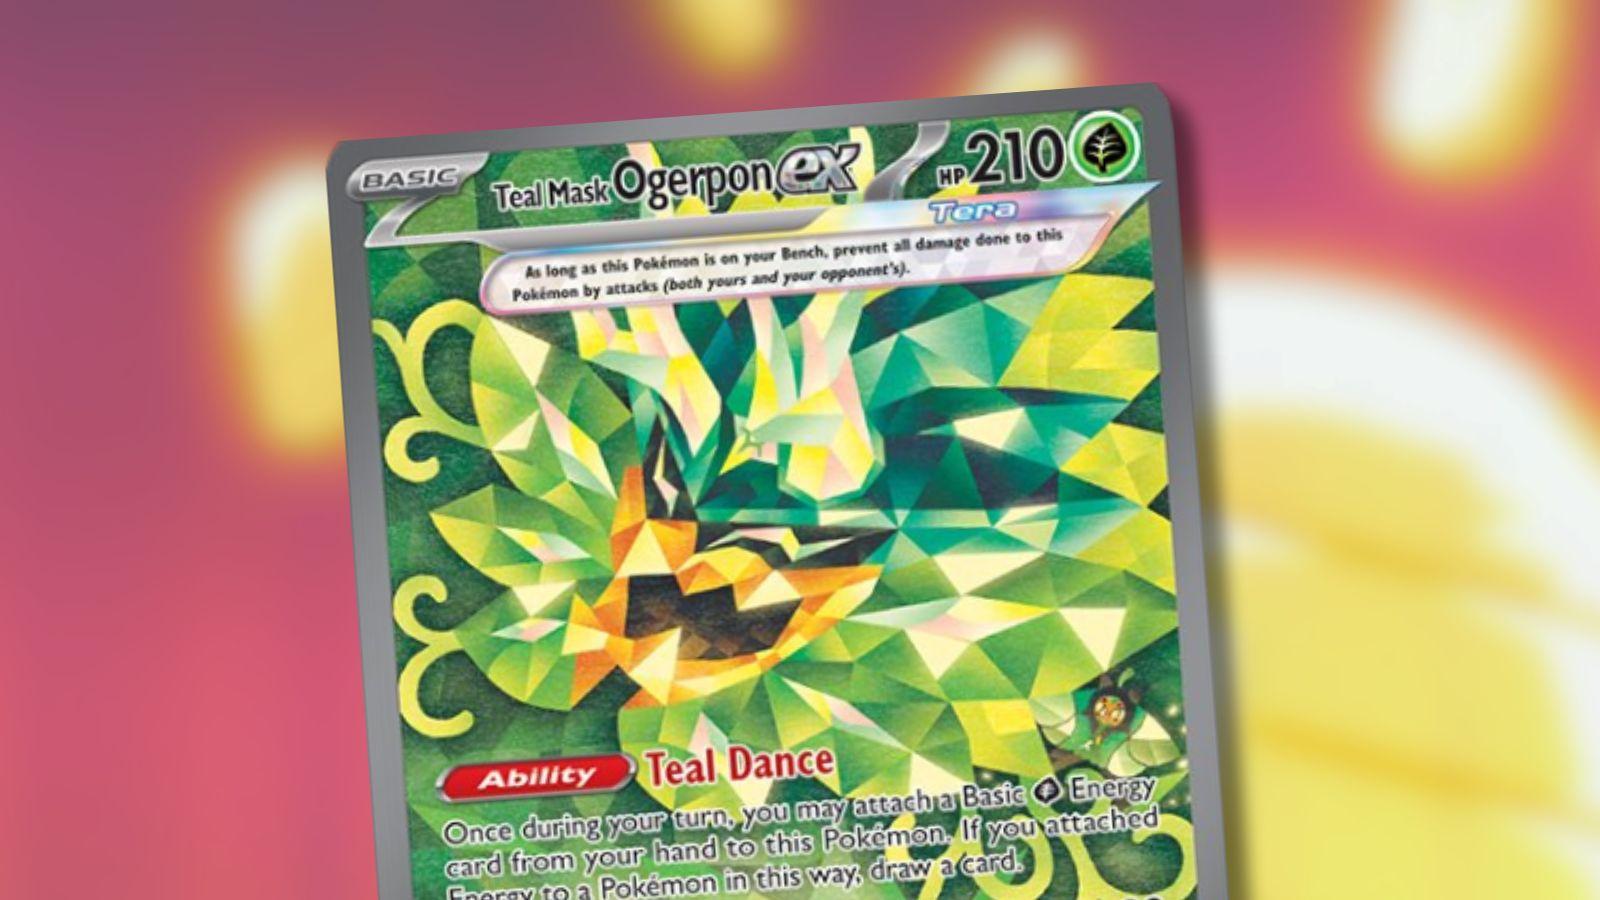 Ogerpon Pokemon card with abstract Pay Day video game background.